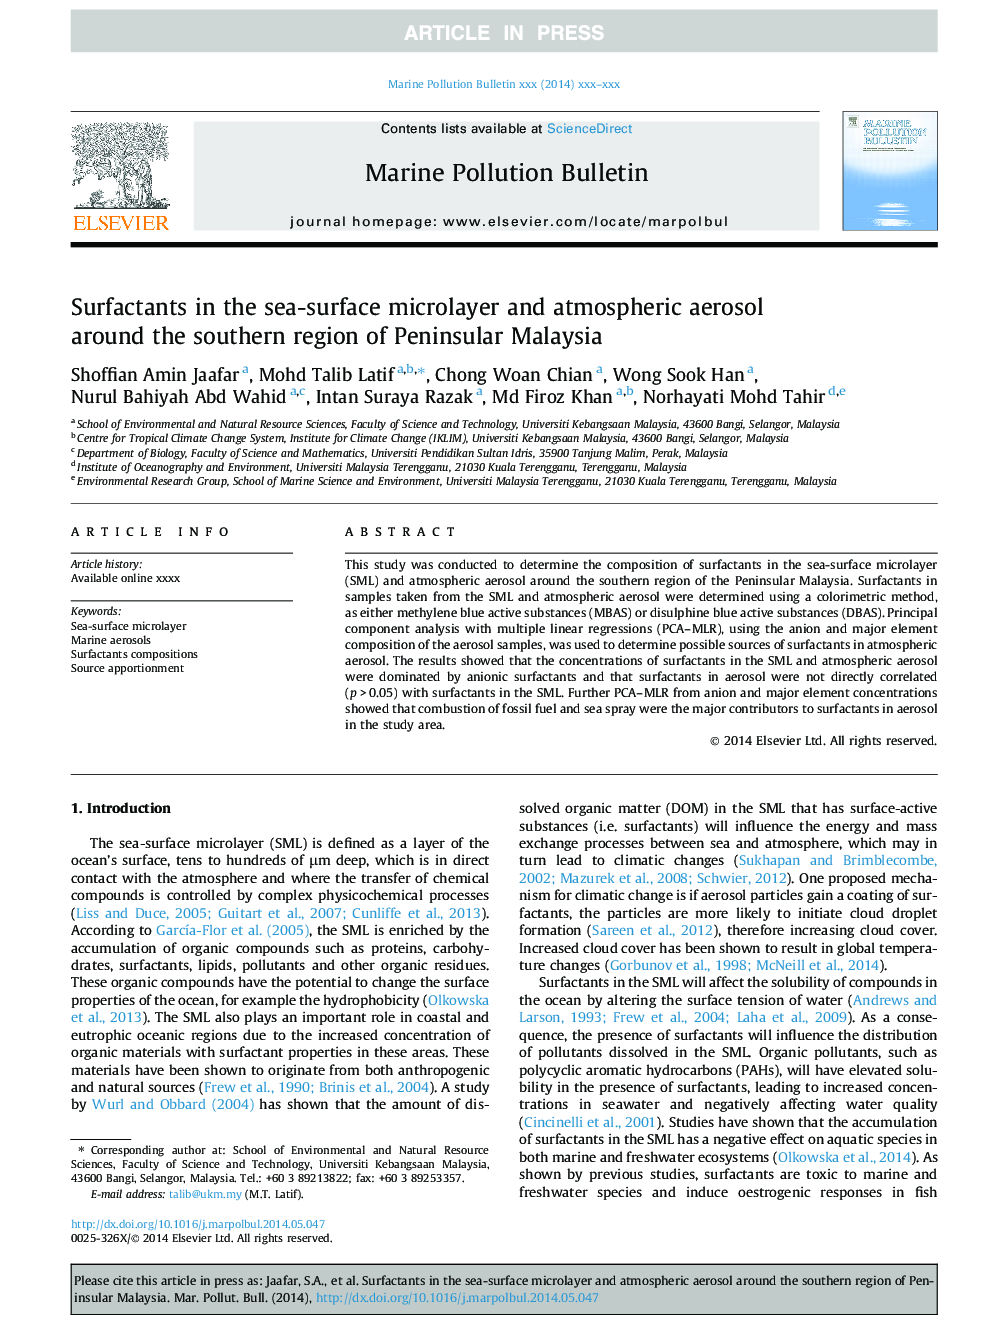 Surfactants in the sea-surface microlayer and atmospheric aerosol around the southern region of Peninsular Malaysia